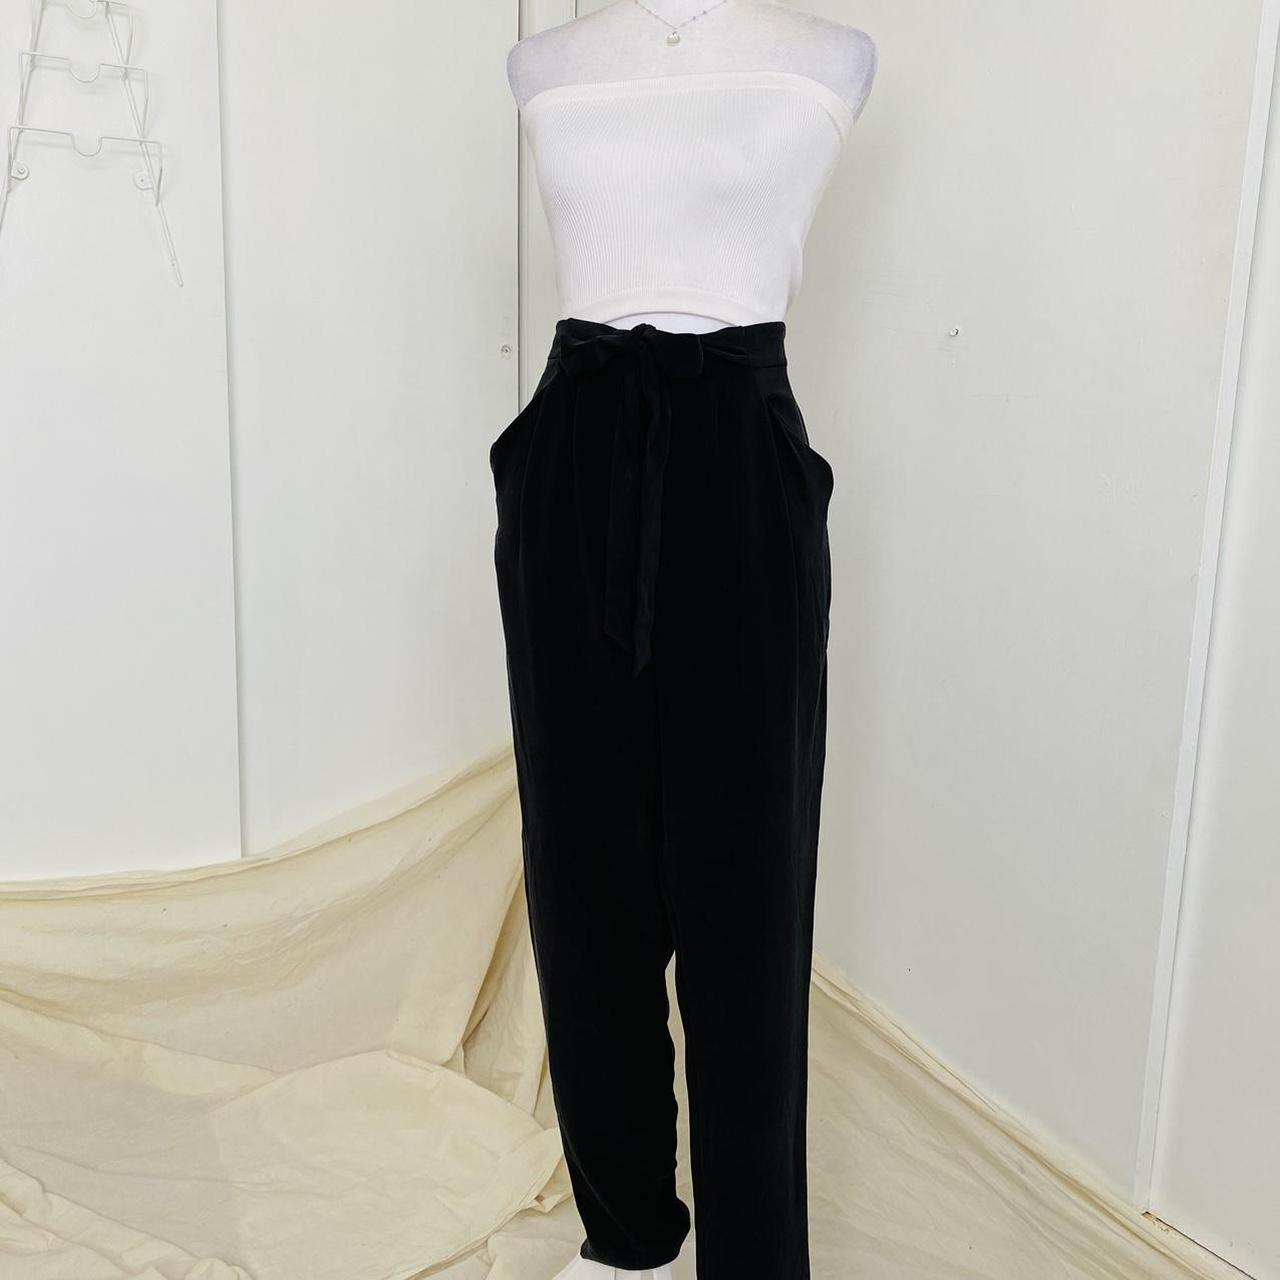 Bootcut pants wide leg. Black with Marled gray upper - Depop